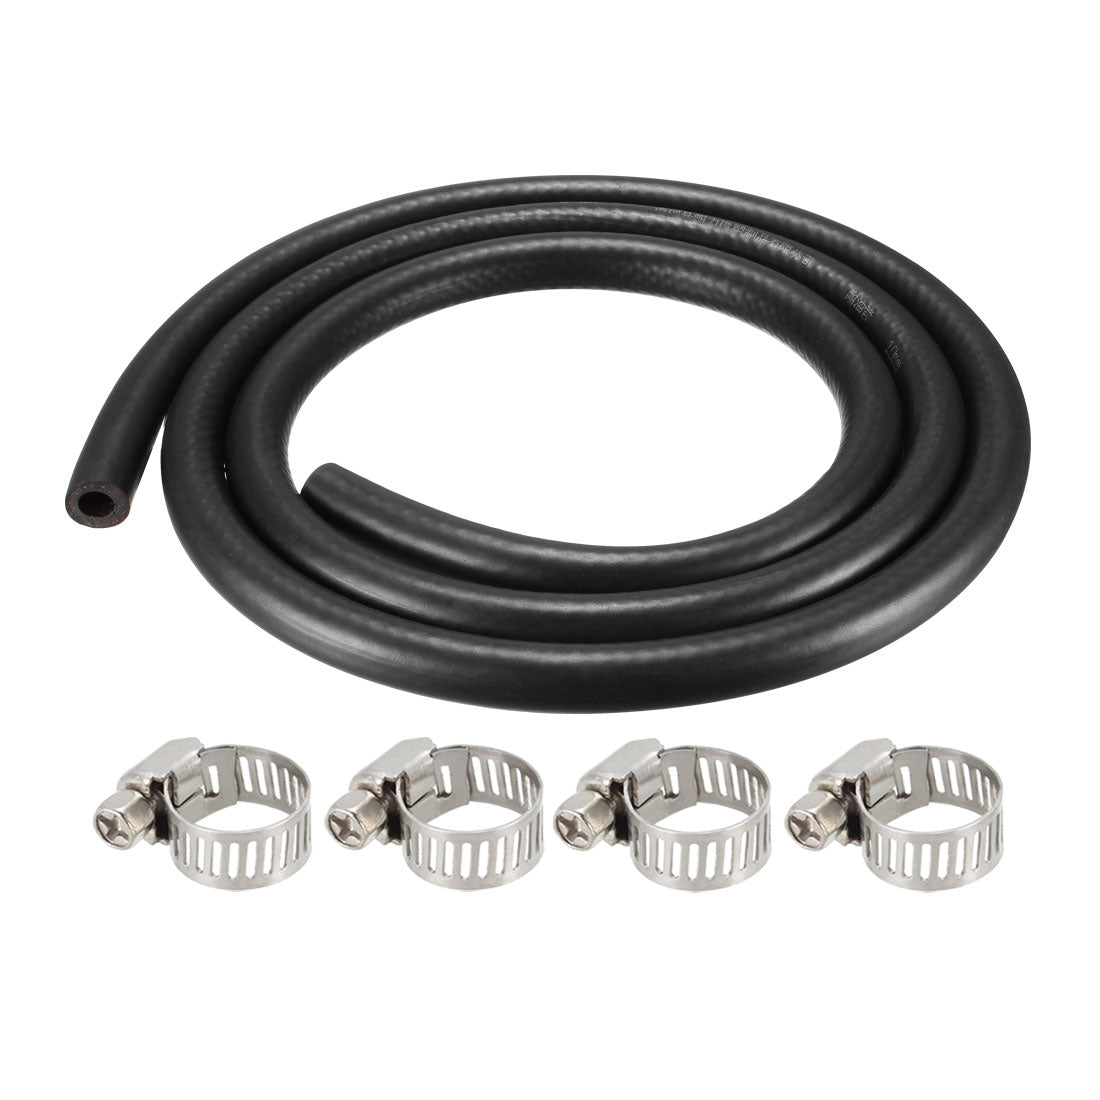 uxcell Uxcell Fuel Line Fuel Hose Rubber  10mm I.D.  1.8M/5.9FT  Diesel Petrol Hose Engine Pipe Tubing with 4 Clamps